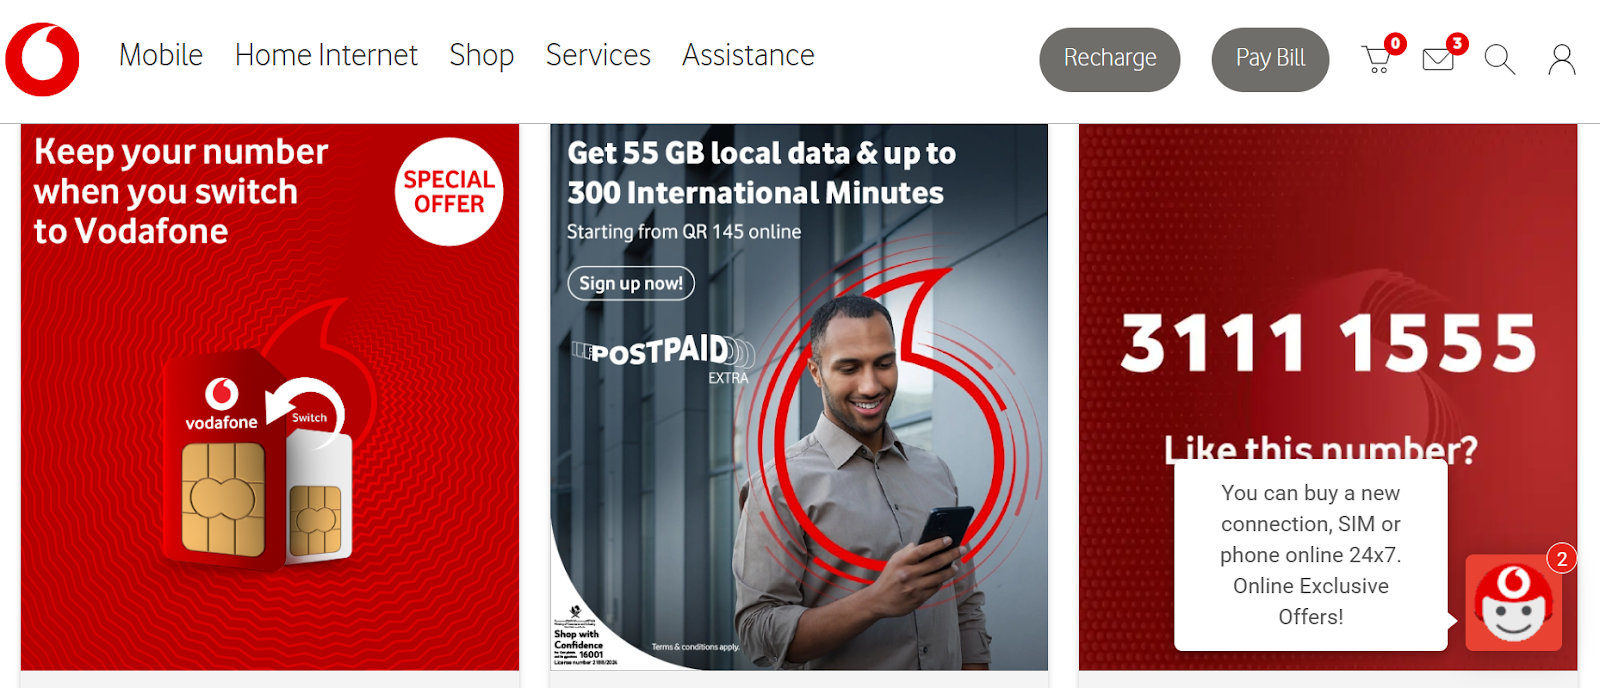 Vodafone Qatar website snapshot highlighting the services it offers.